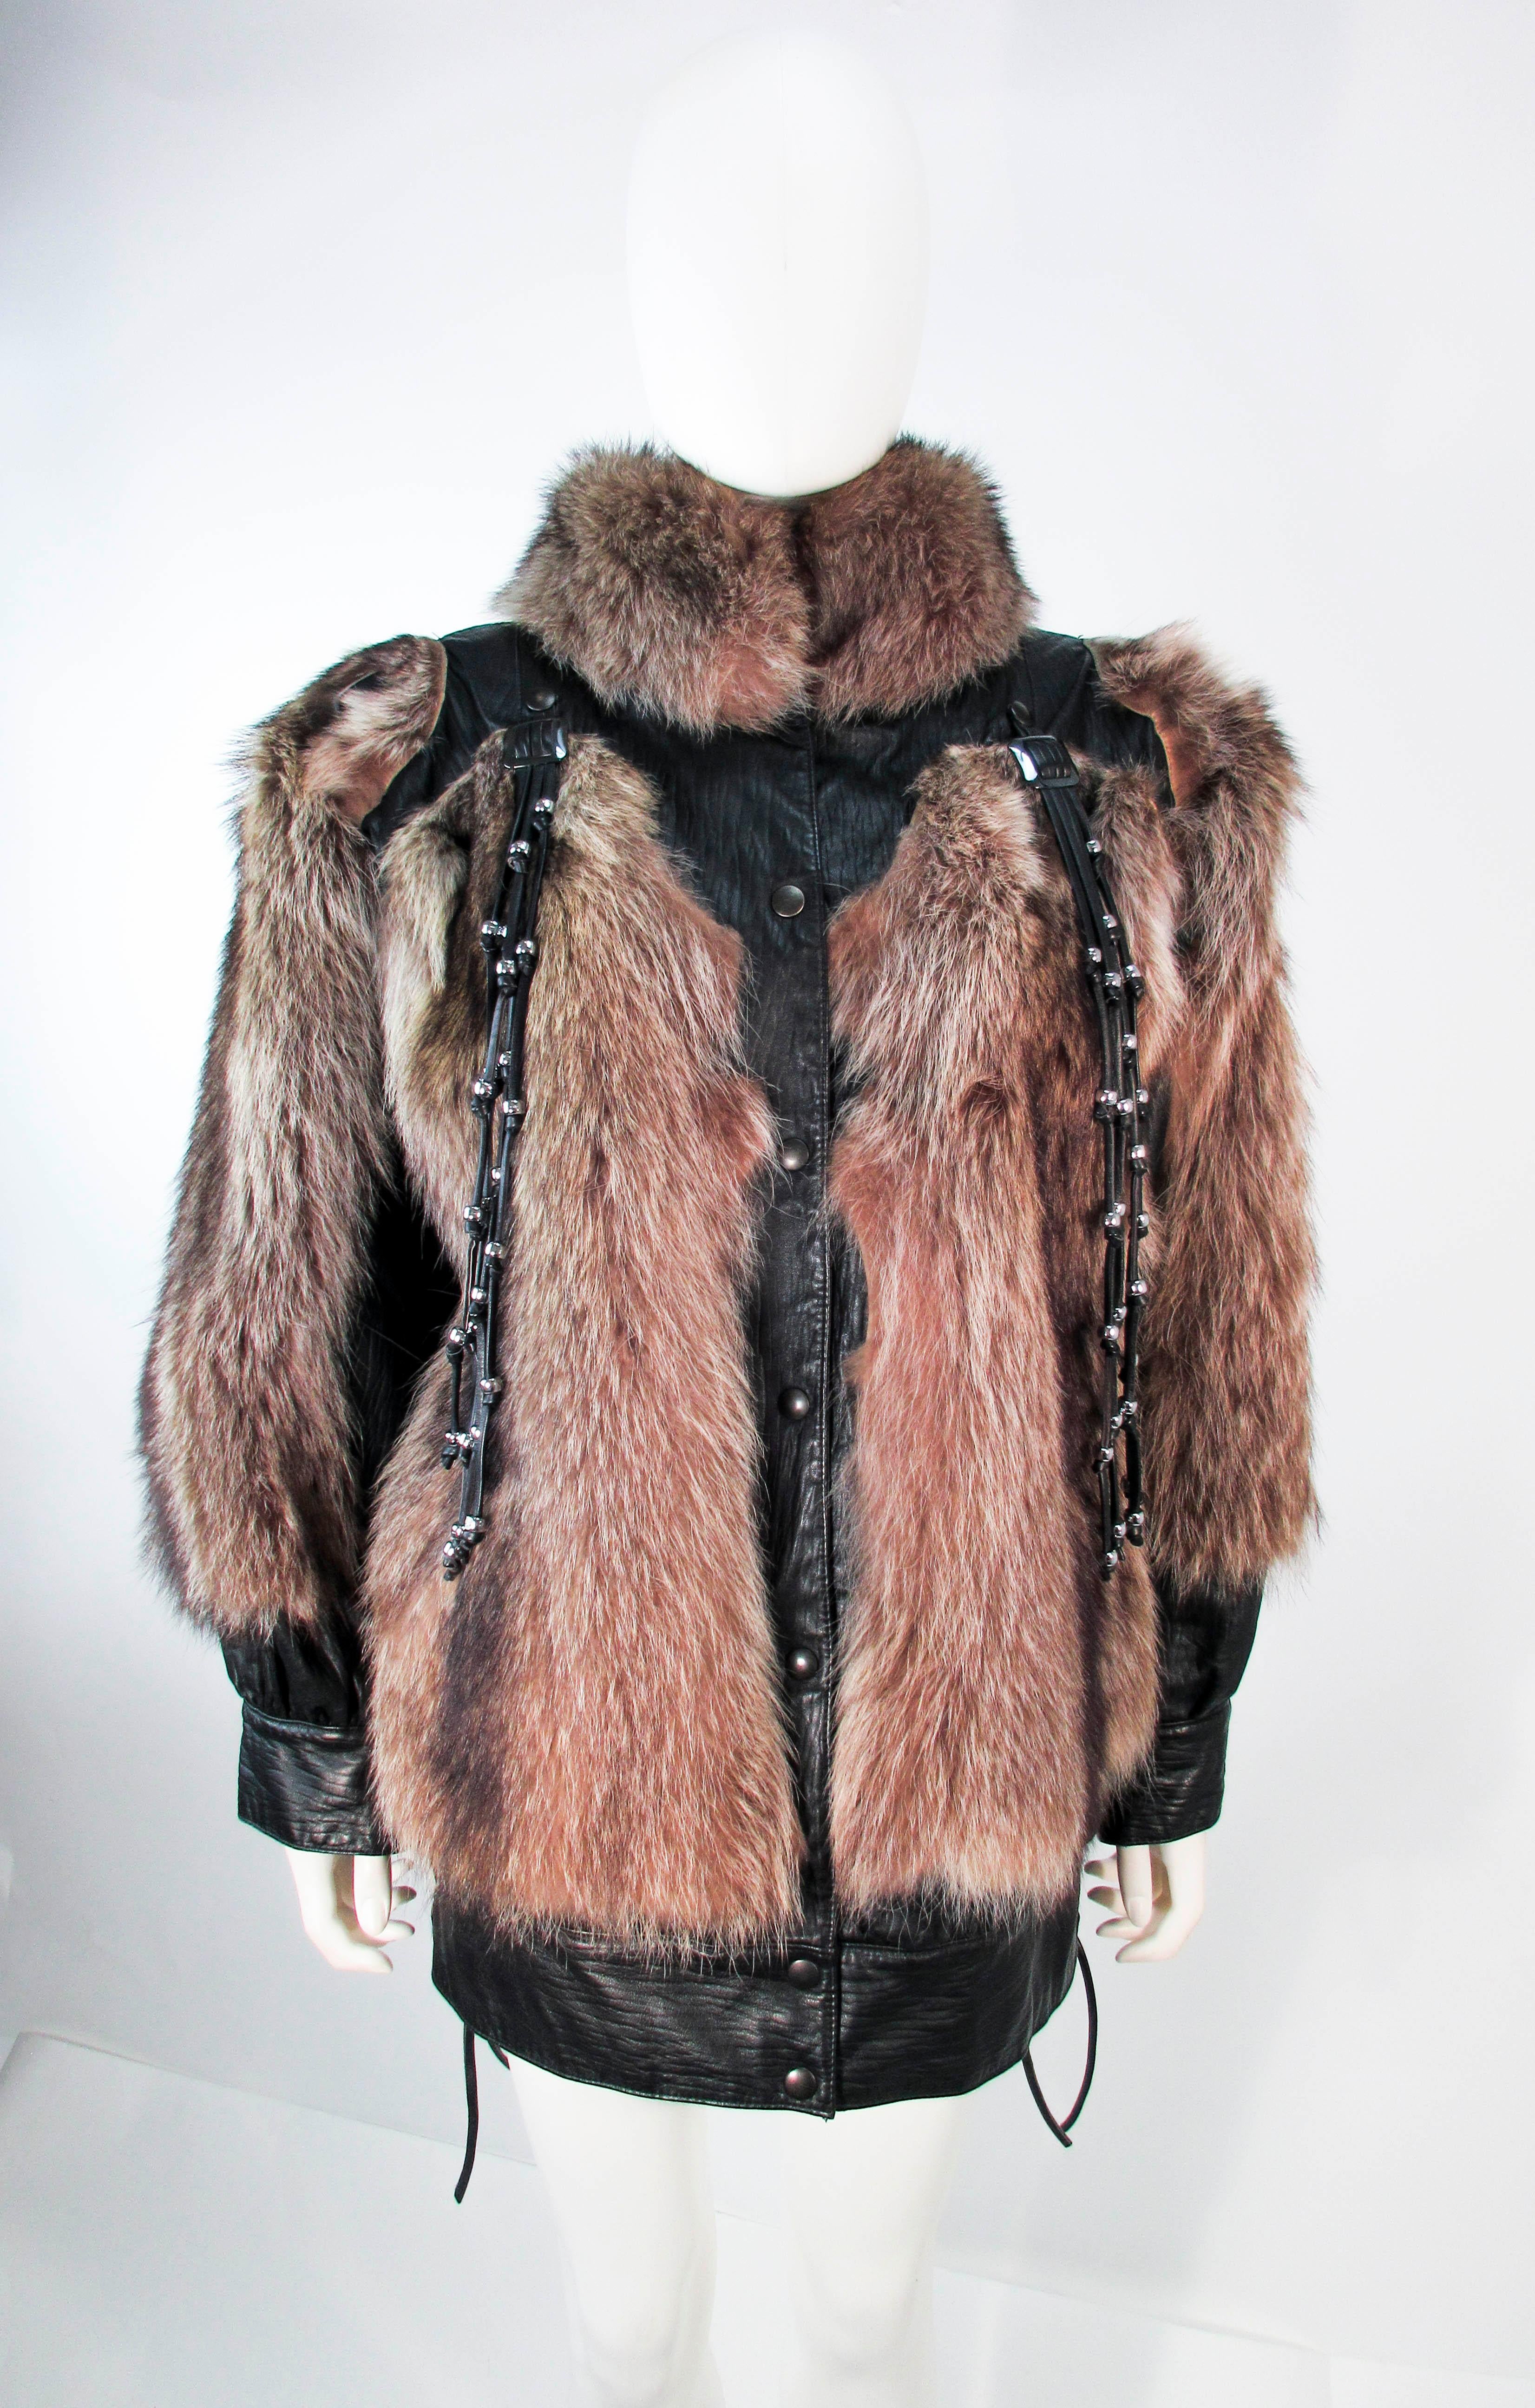 This is an amazing Jacques Saint Laurent jacket which is composed of raccoon fur with leather trim. Features detachable leather tassels and a side tie lace up corset detail at the waist. There are pockets and center front snap closures. In excellent